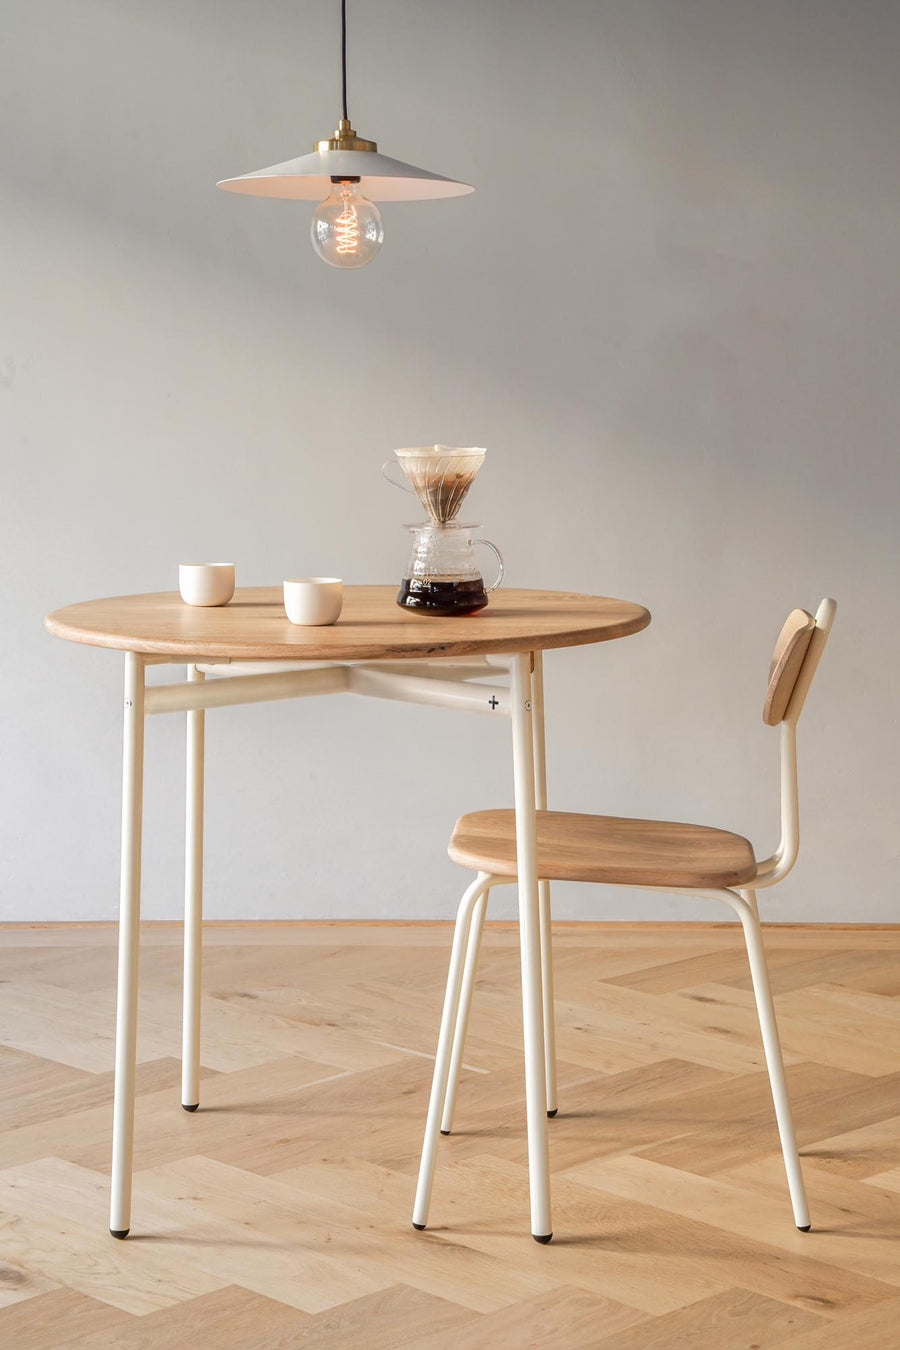 Round wooden cafe table and chair - Pedersen + Lennard